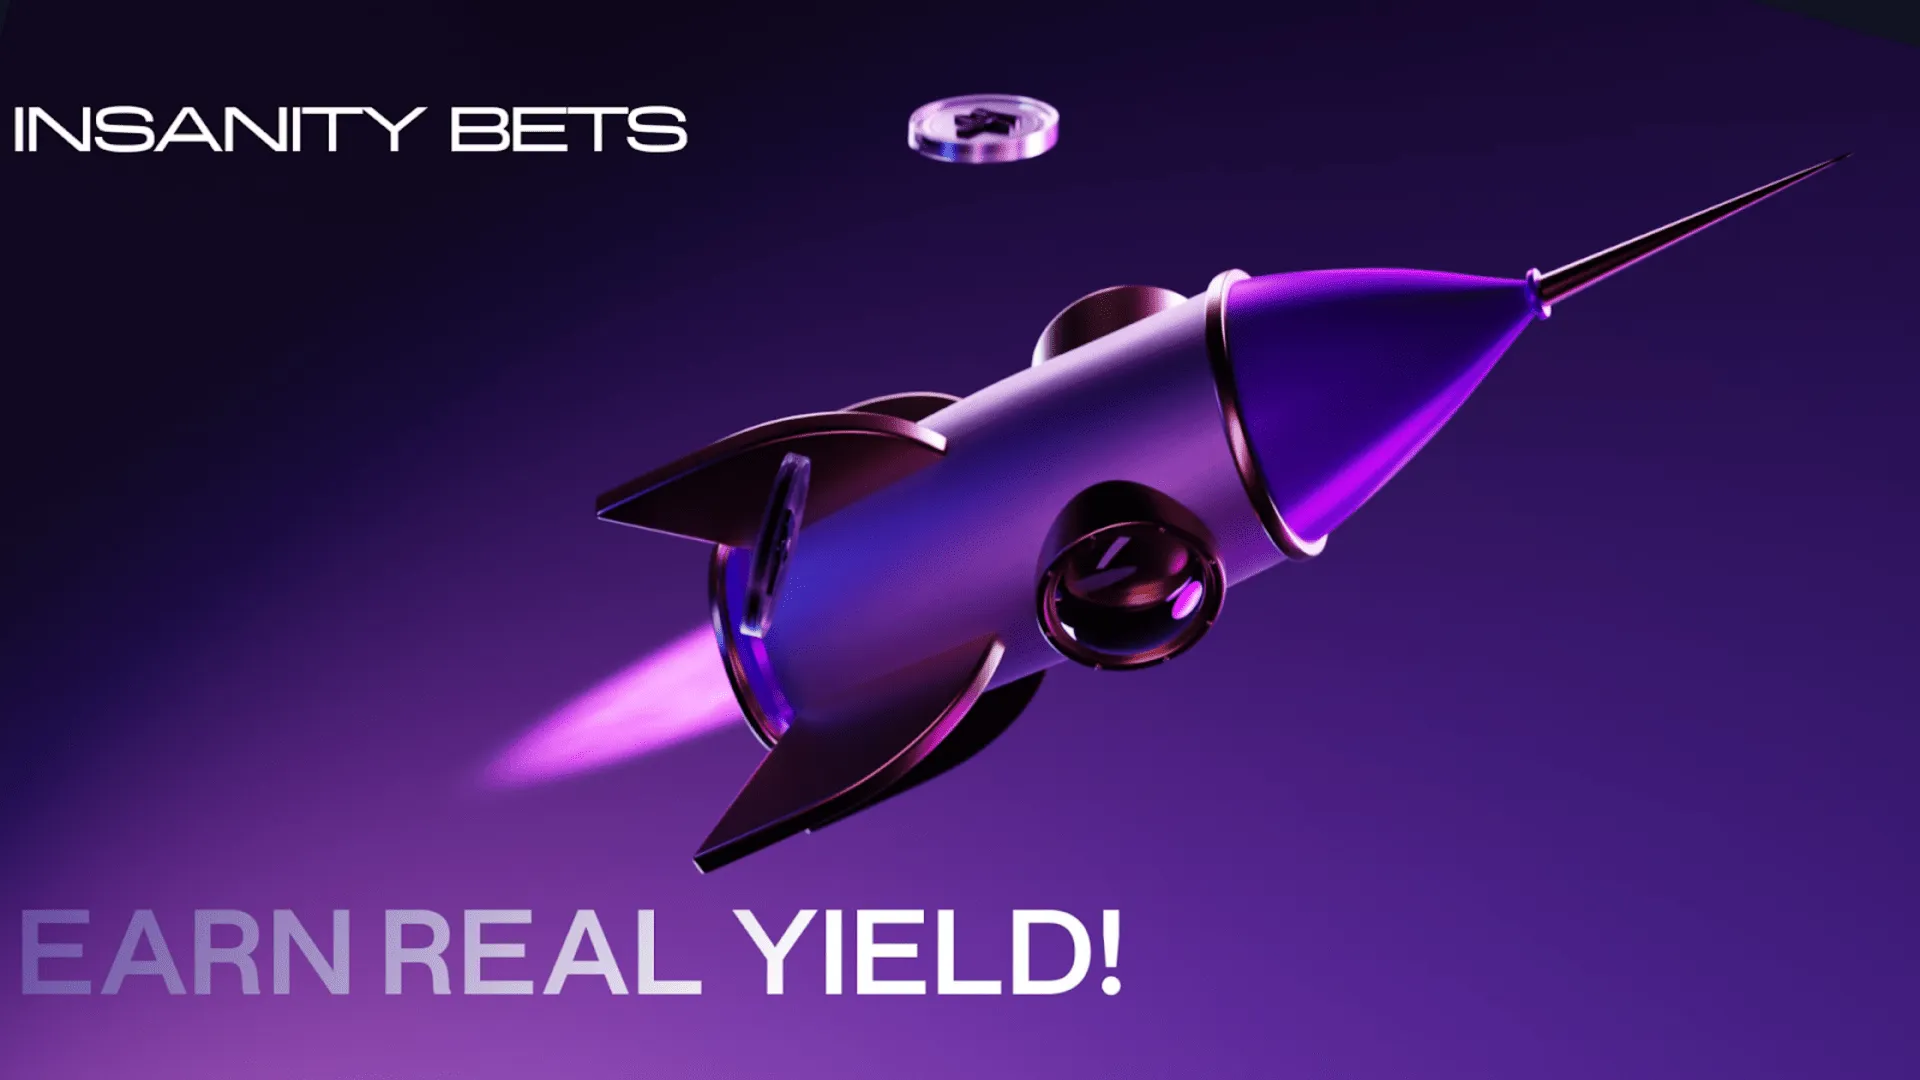 InsanityBets (IBET) Leaps Ahead With Its Presale While Avalanche and Cosmos Decline